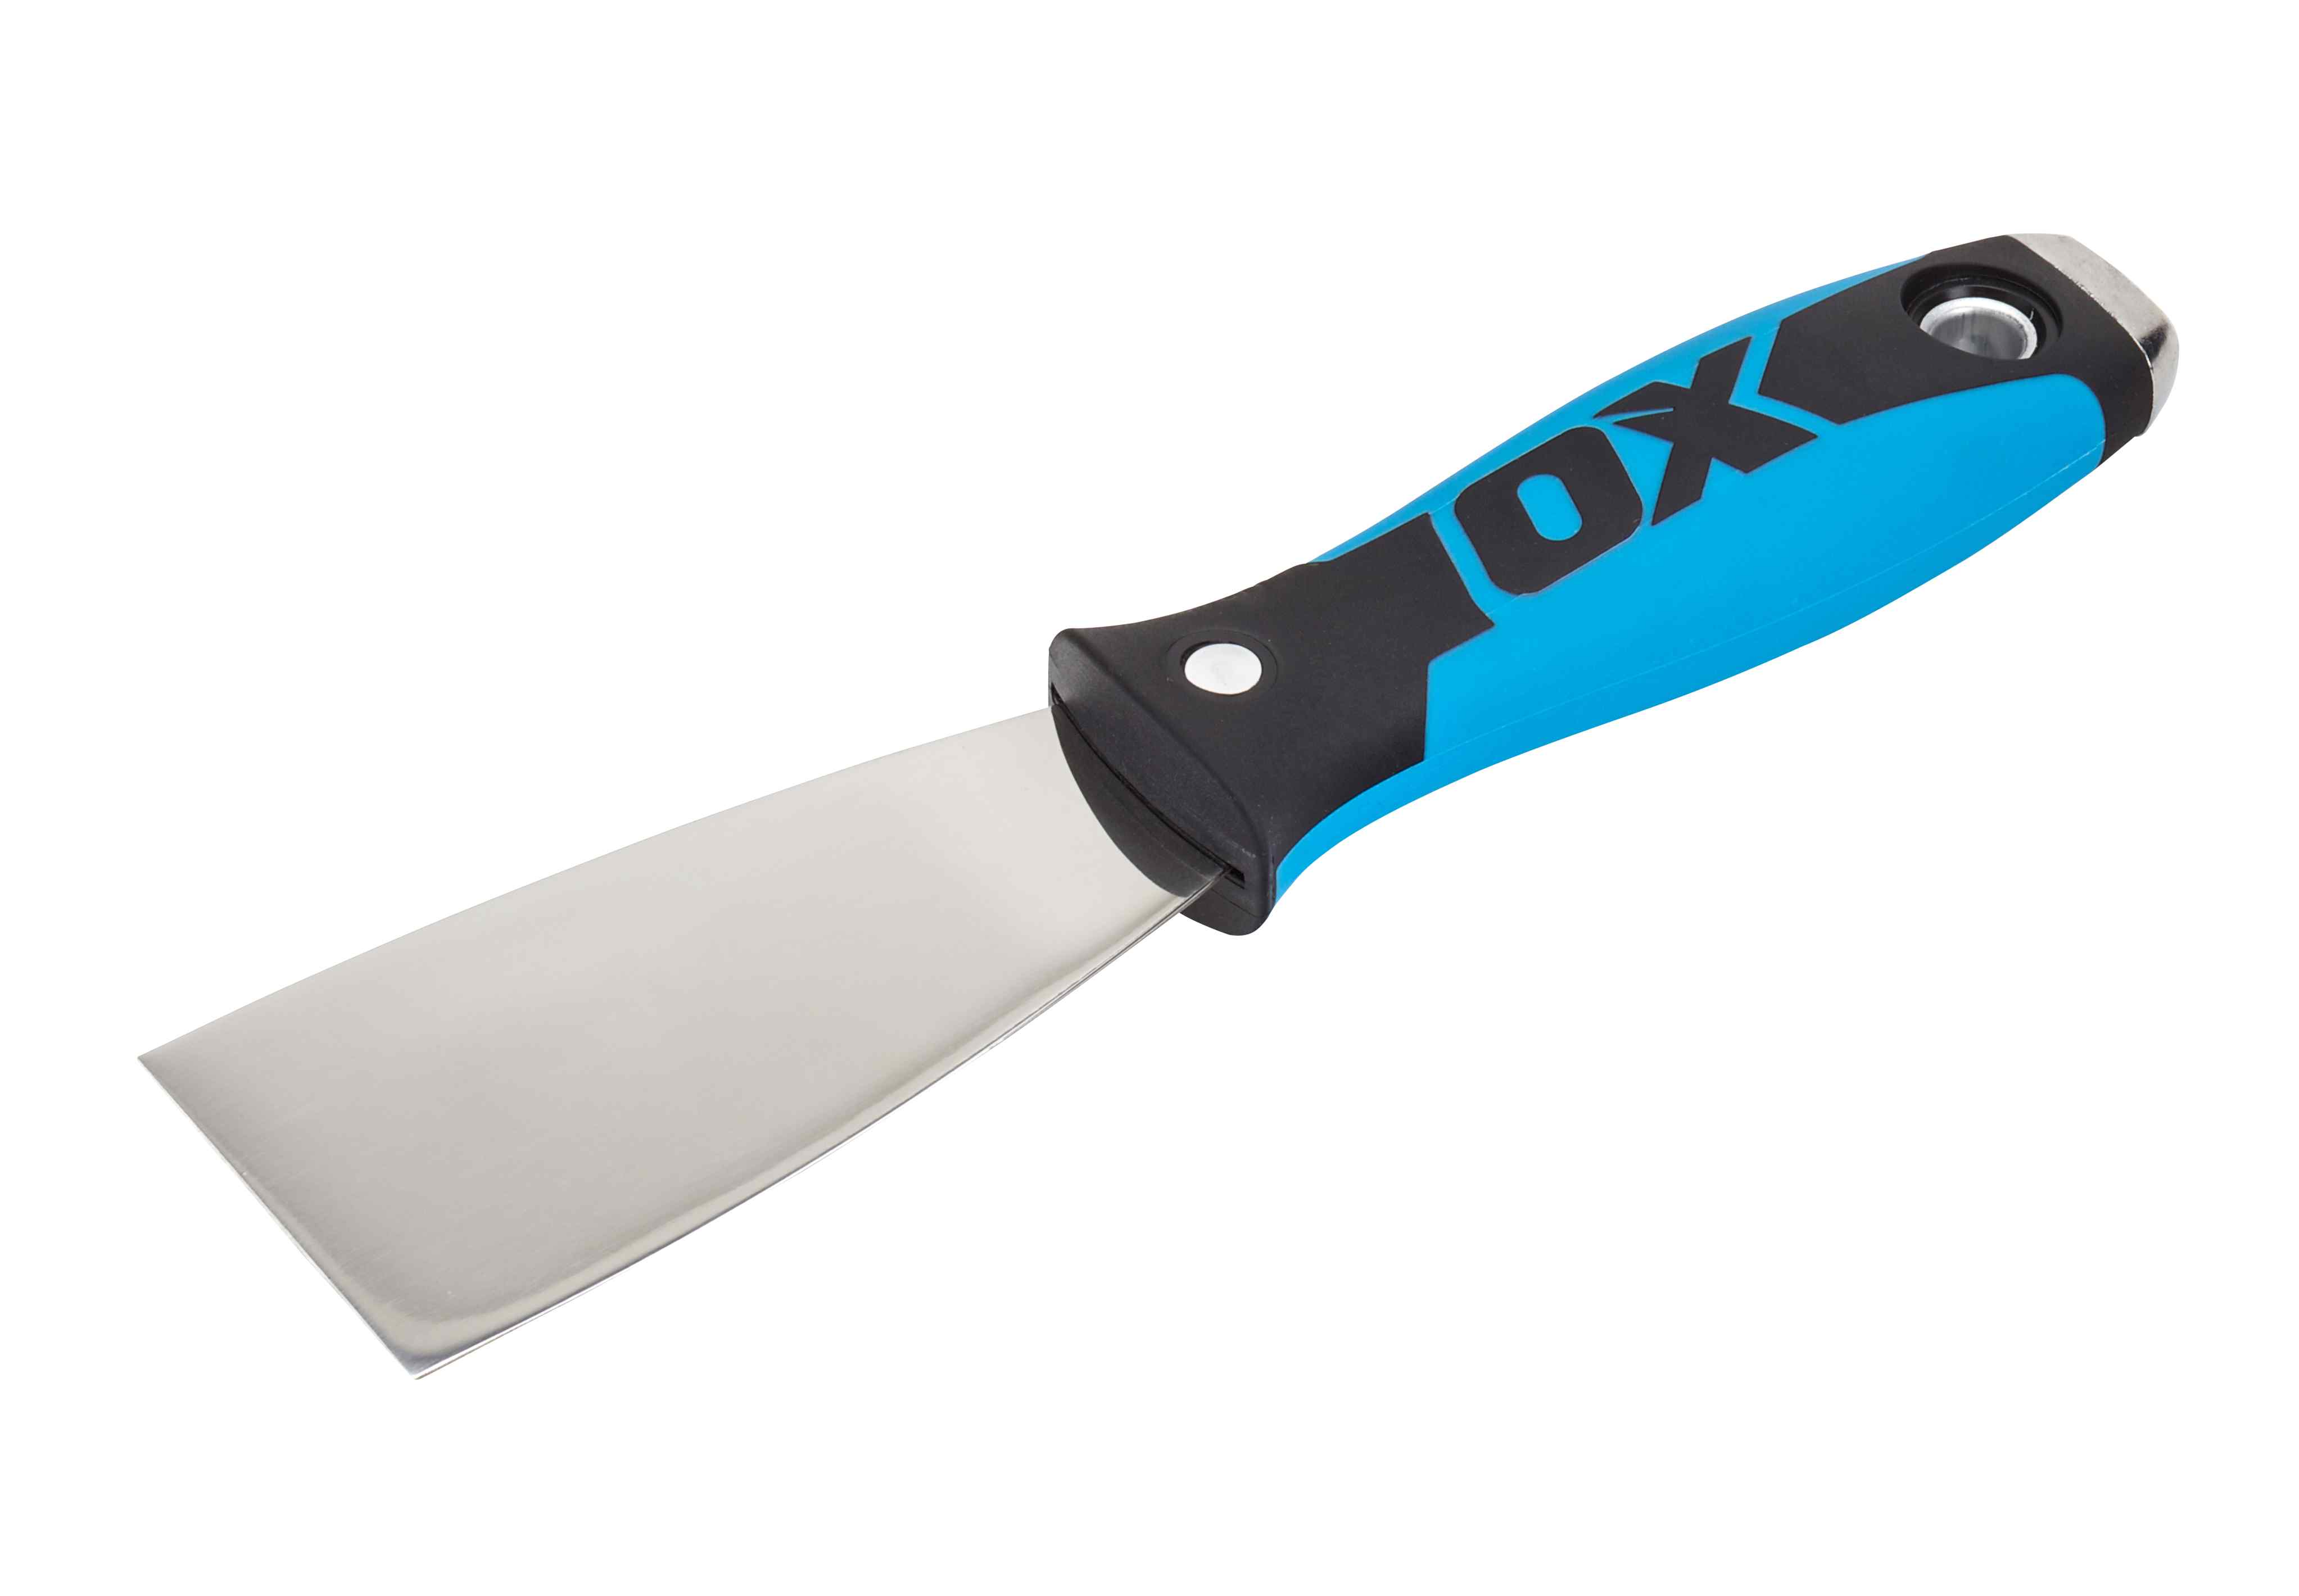 OX Pro Joint Knife - 50mm